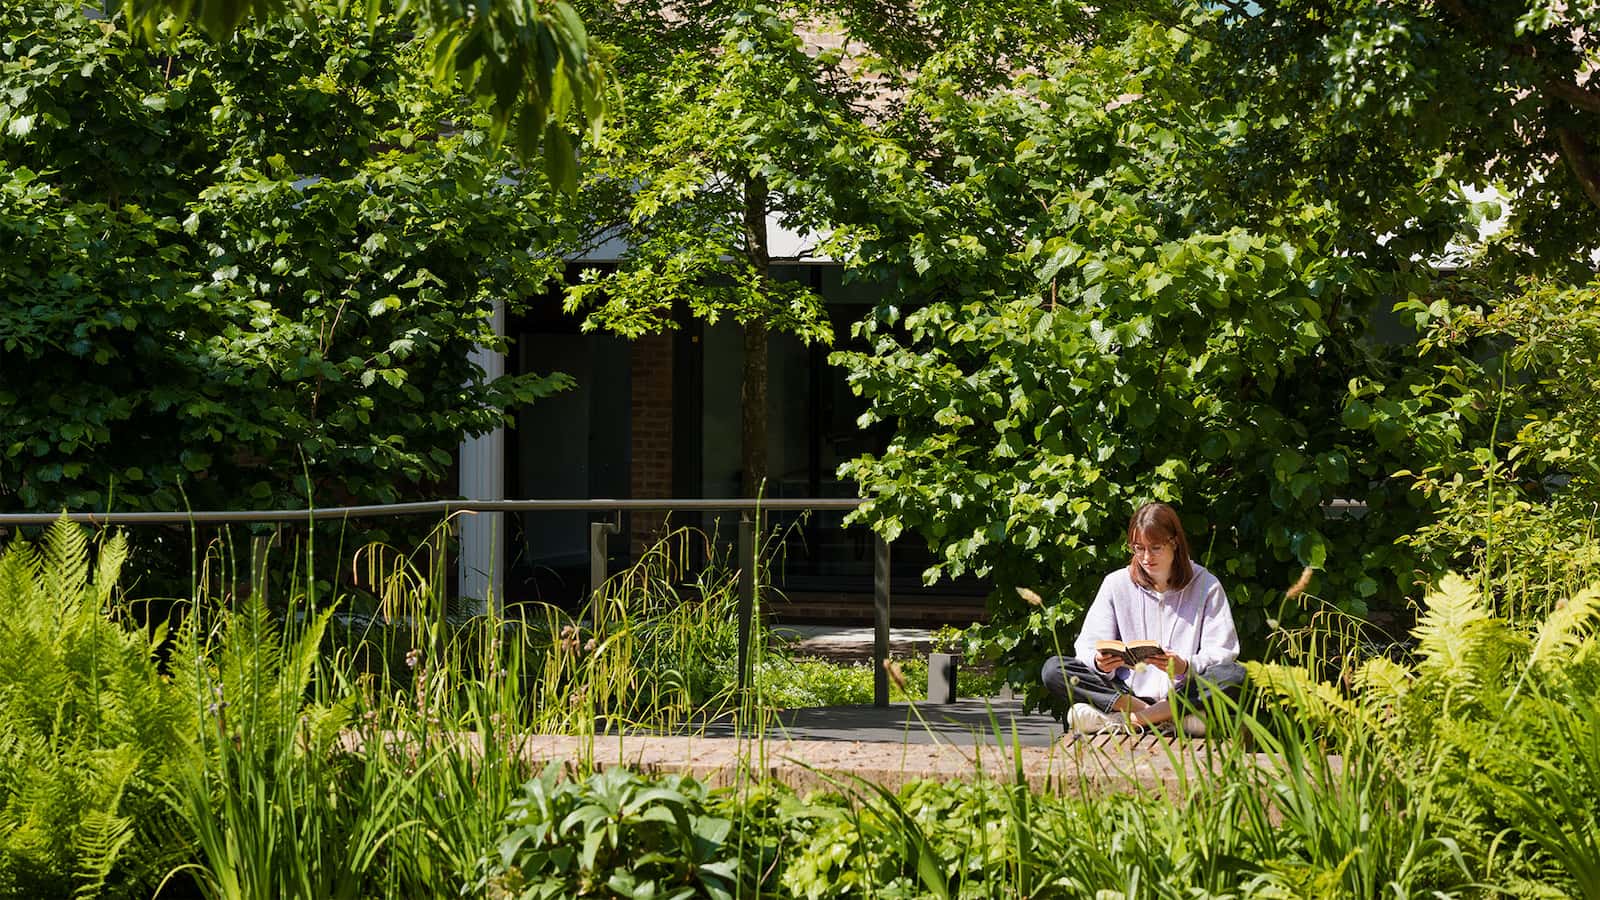 Student reading surrounded by greenery